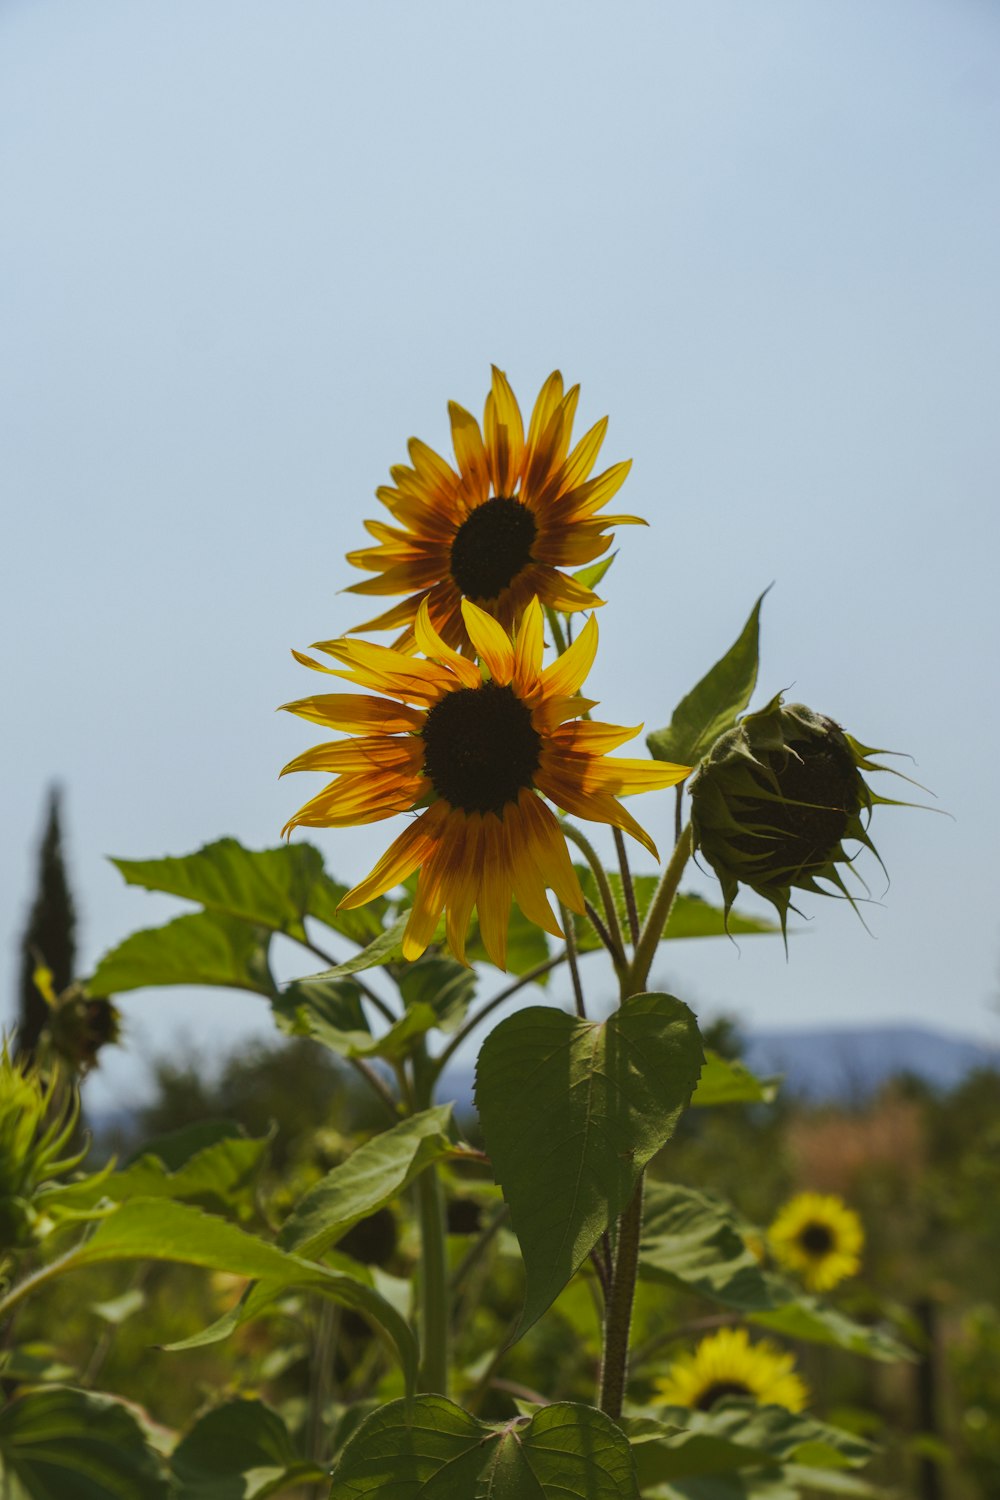 a large sunflower standing in a field of sunflowers